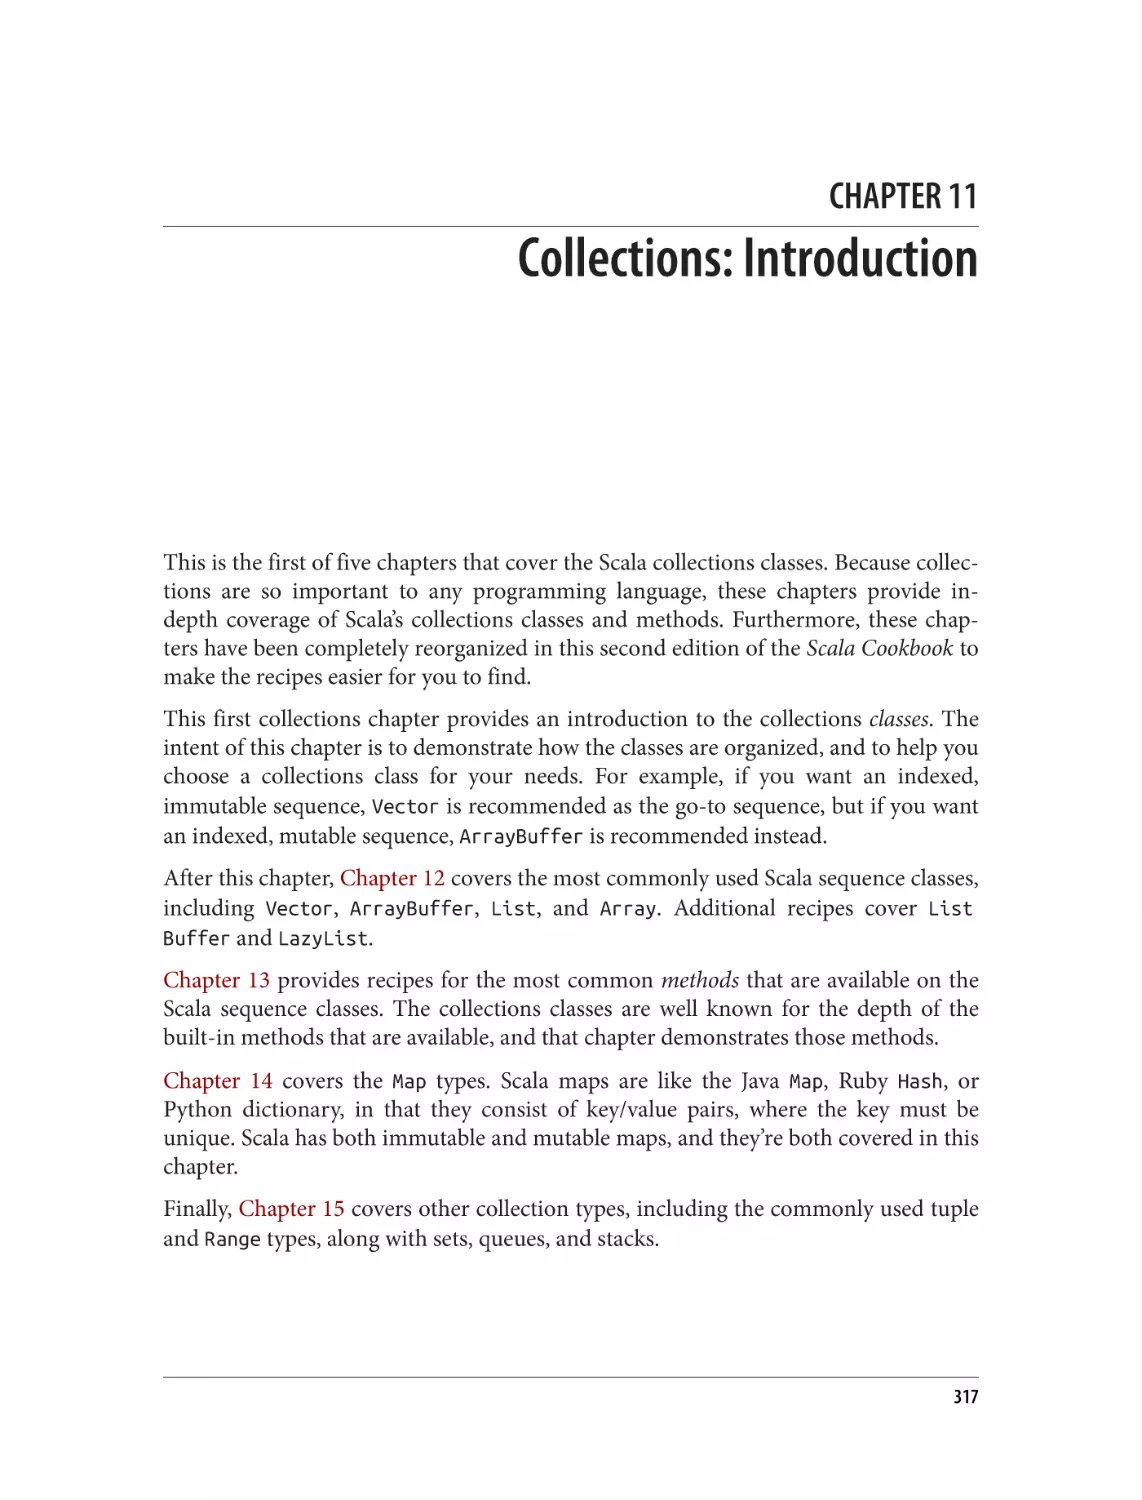 Chapter 11. Collections